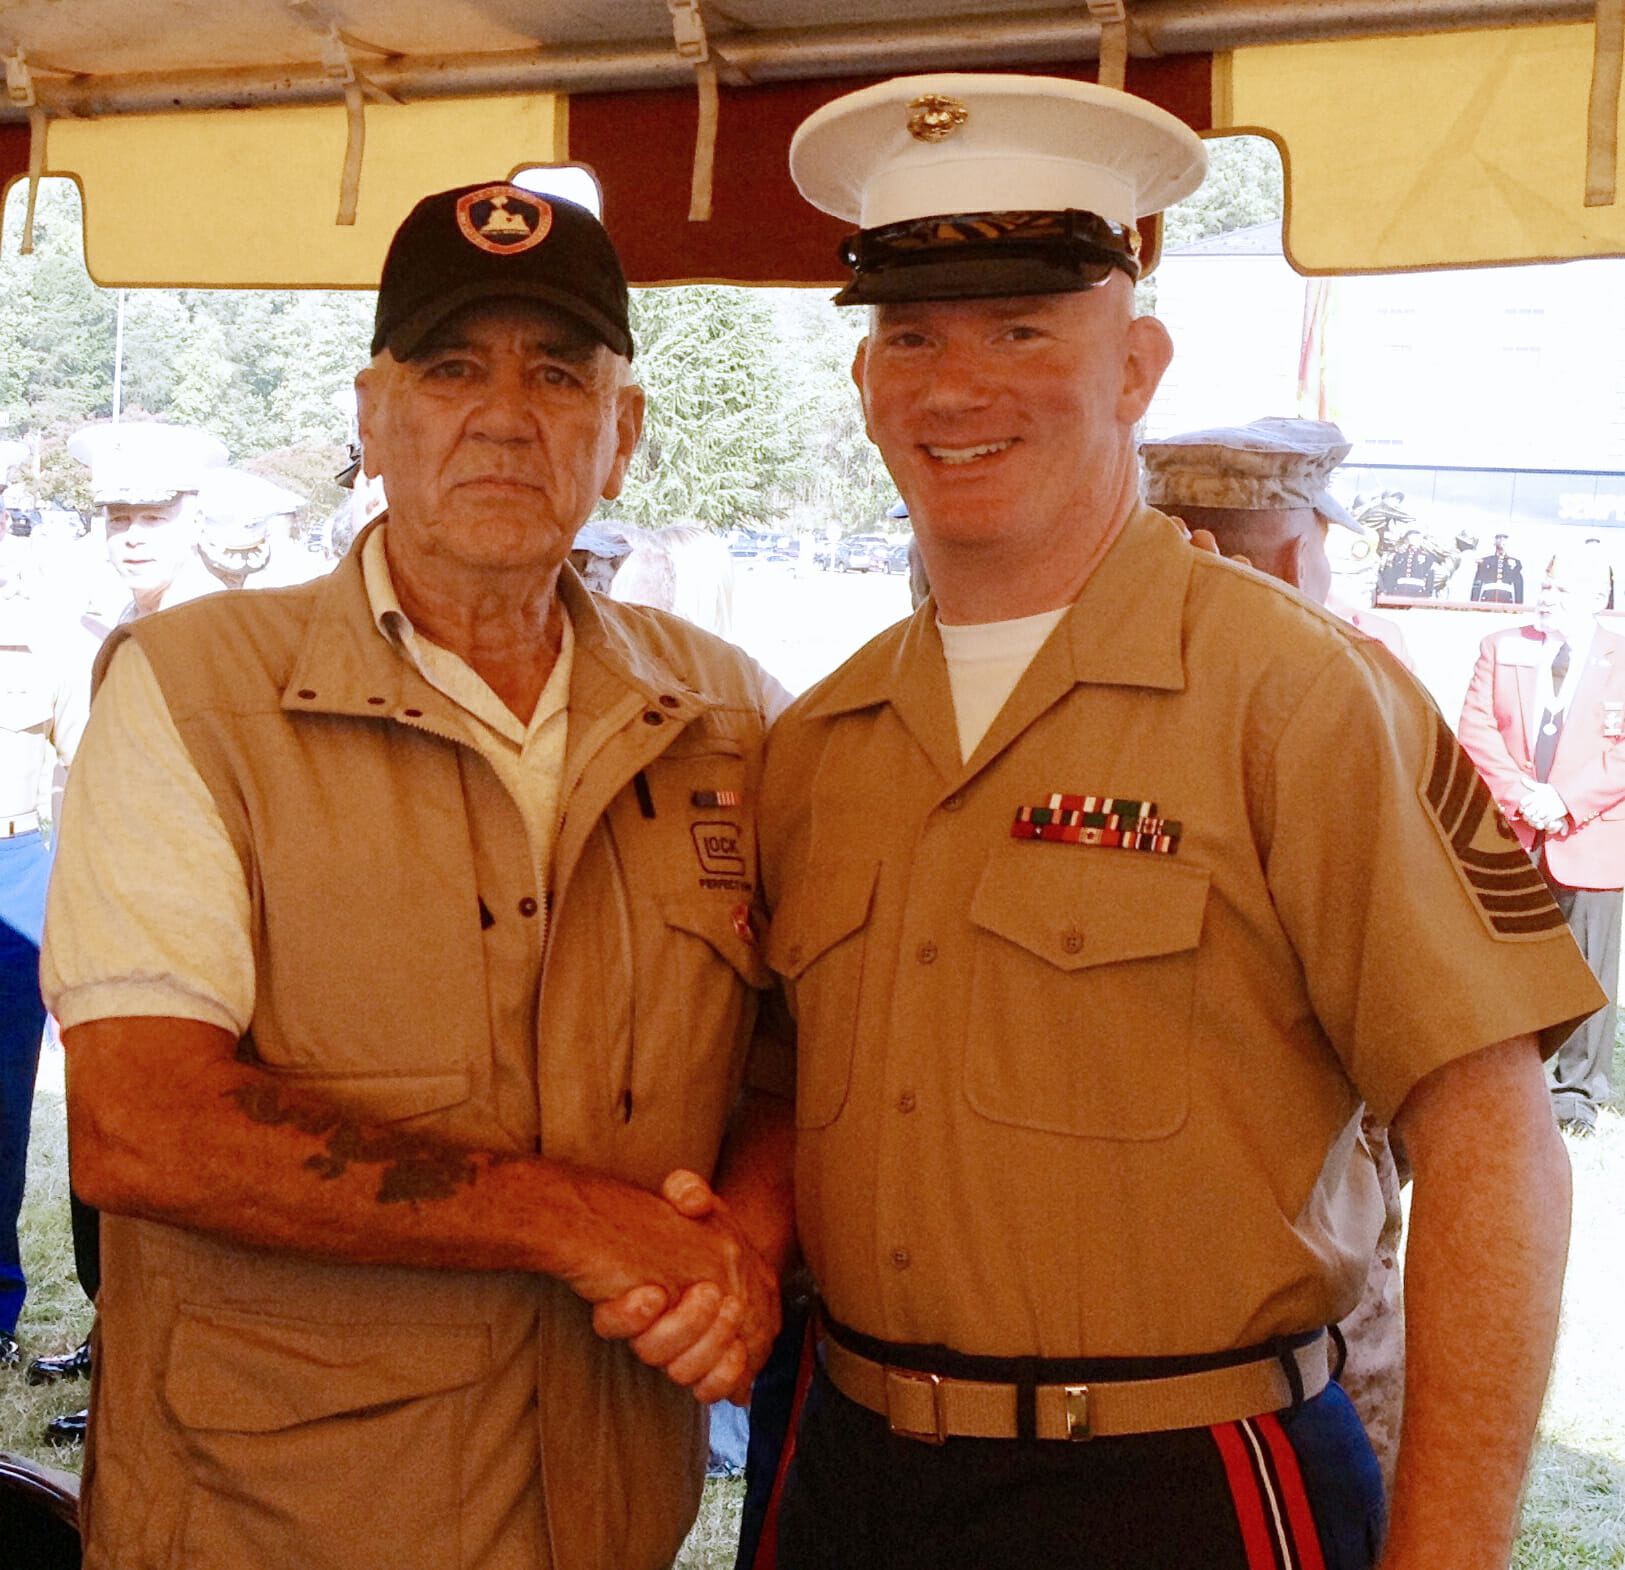 Actor and former Drill Sgt. R. Lee Ermey